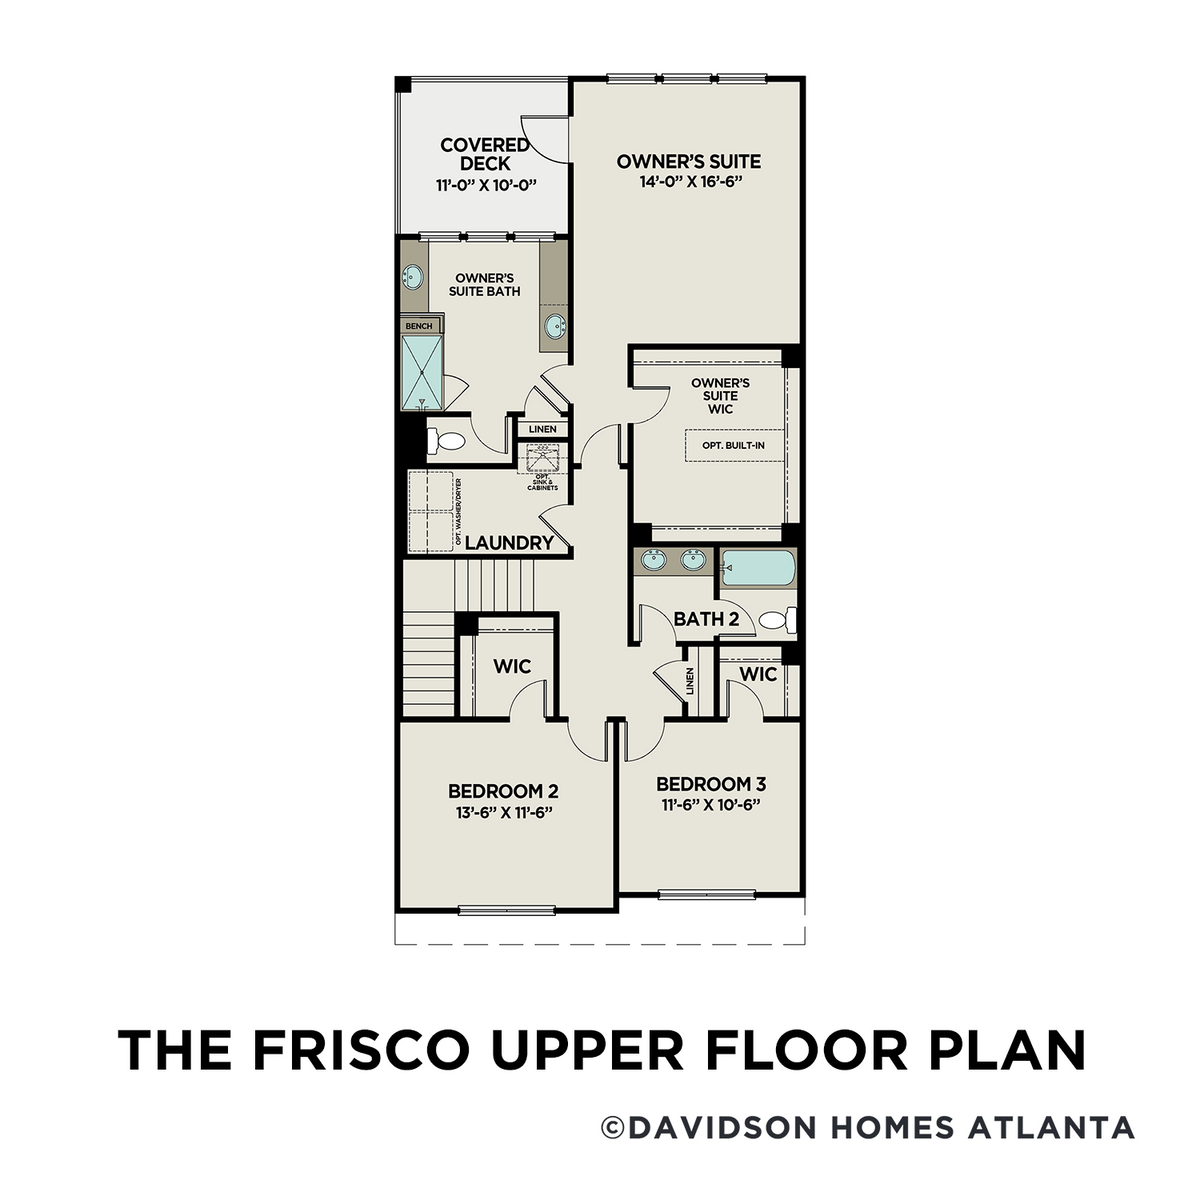 2 - The Frisco B floor plan layout for 408 Falling Water Avenue in Davidson Homes' The Village at Towne Lake community.